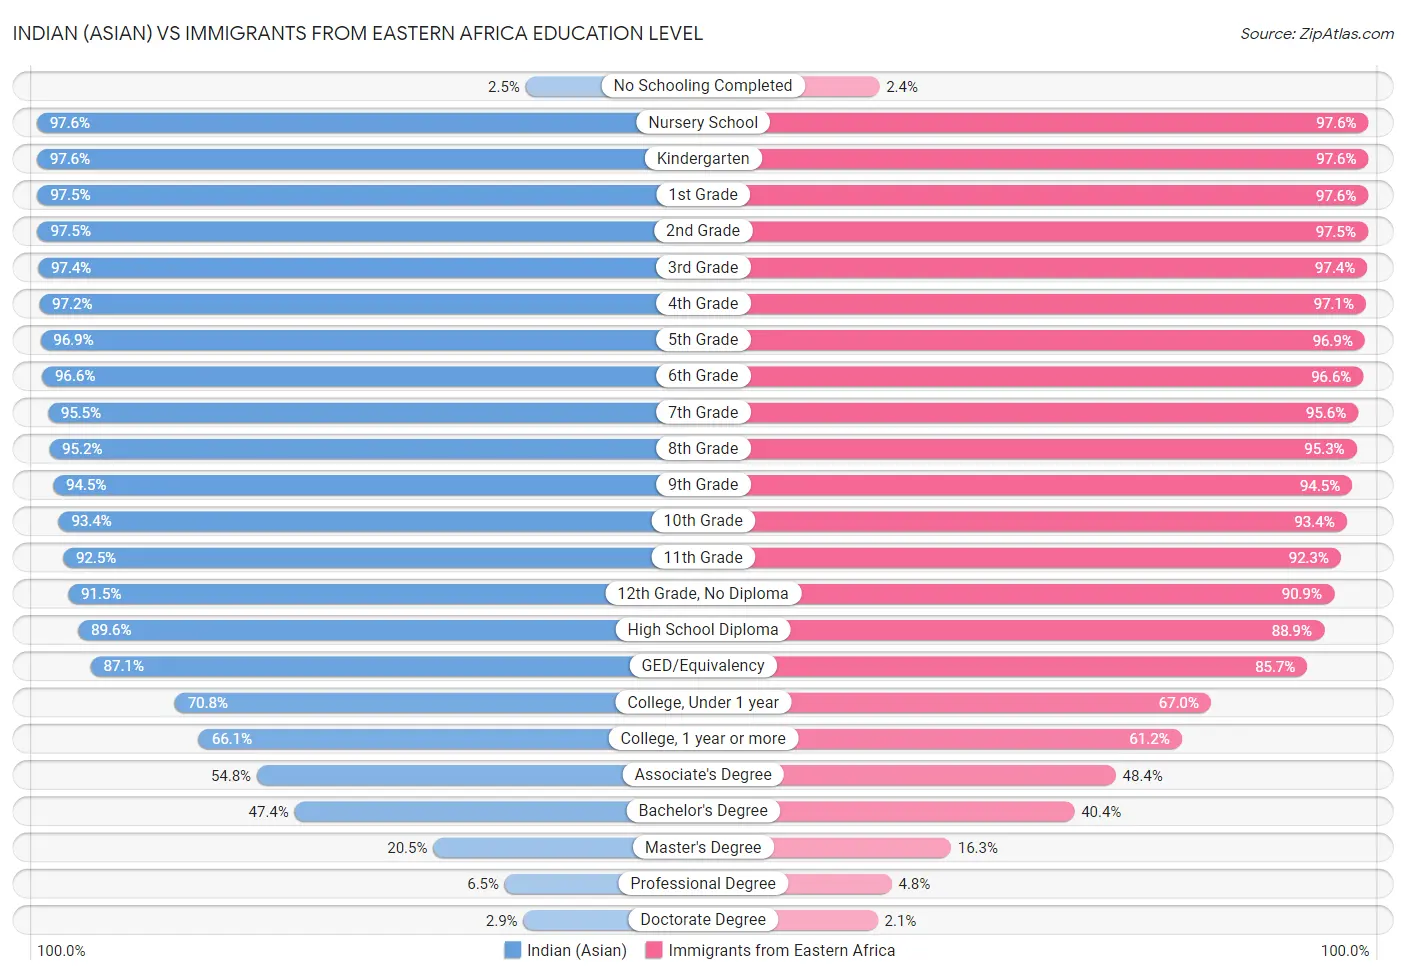 Indian (Asian) vs Immigrants from Eastern Africa Education Level